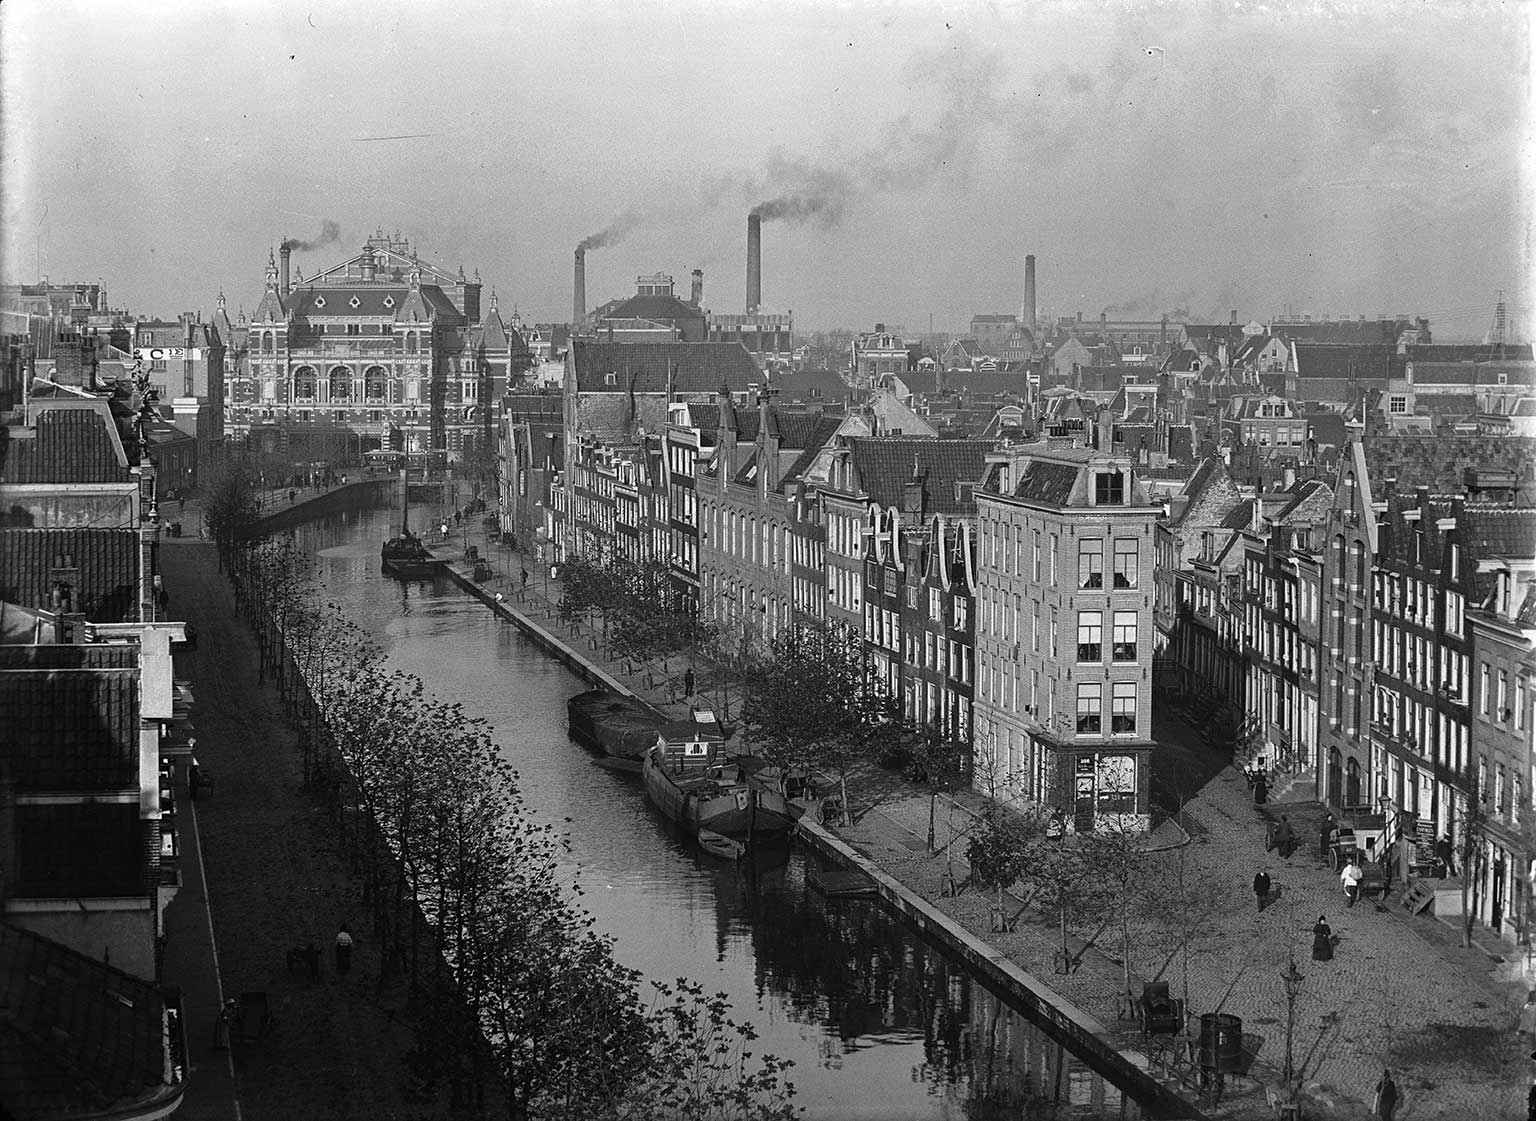 Lijnbaansgracht, Amsterdam, in 1894, photographed by Jacob Olie